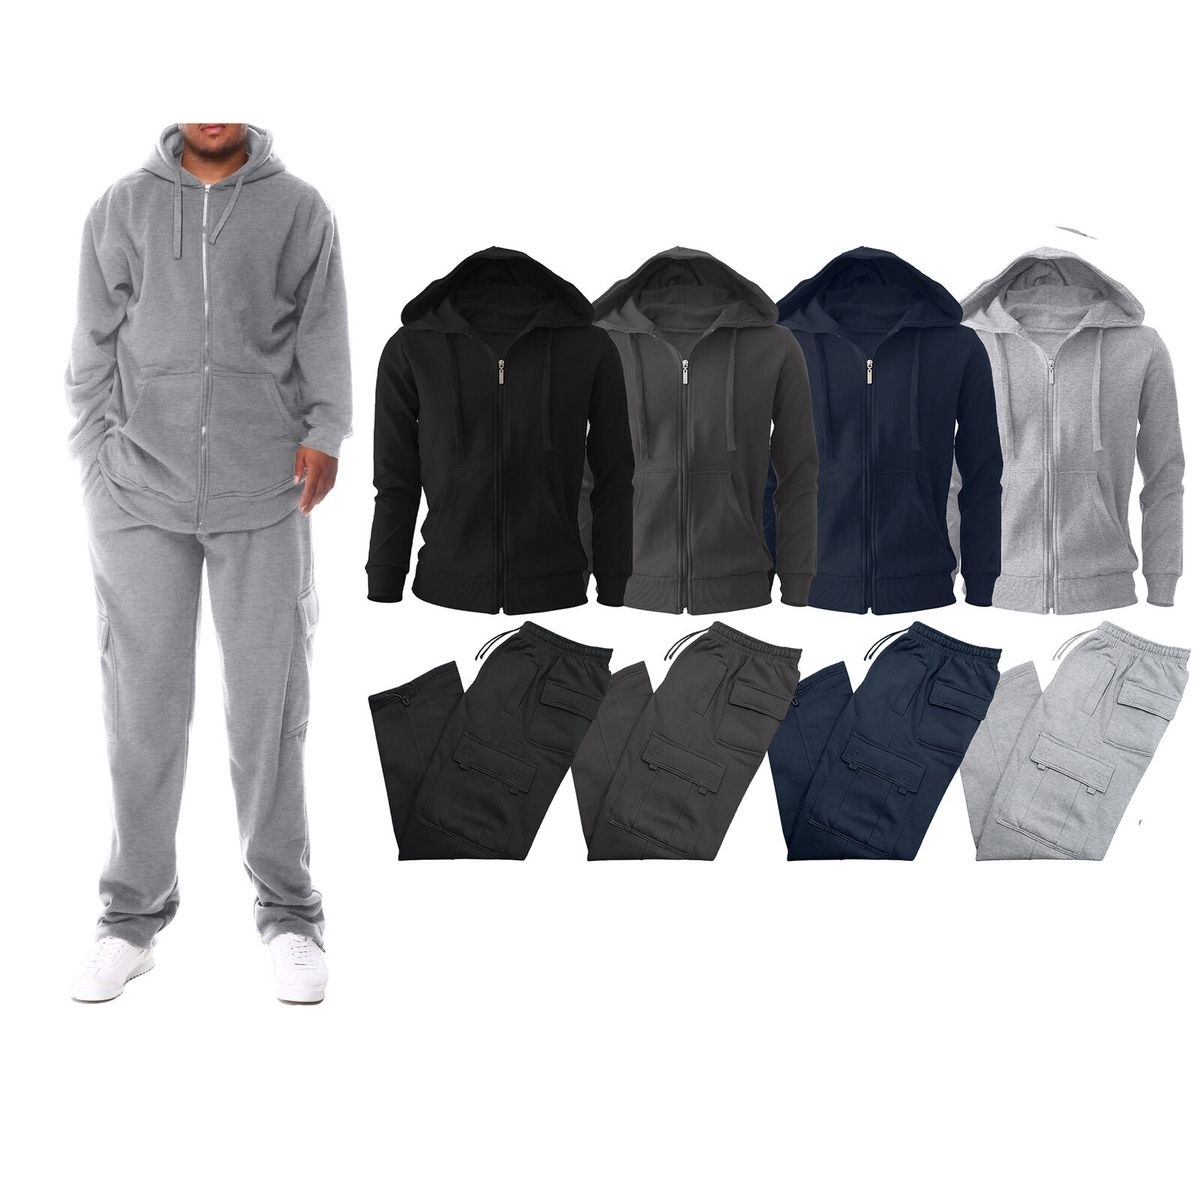 Multi-Pack: Men's Big & Tall Winter Warm Athletic Active Cozy Fleece Lined Multi-Pocket Full Zip Up Cargo Tracksuit - Grey, 1-pack, Xx-large